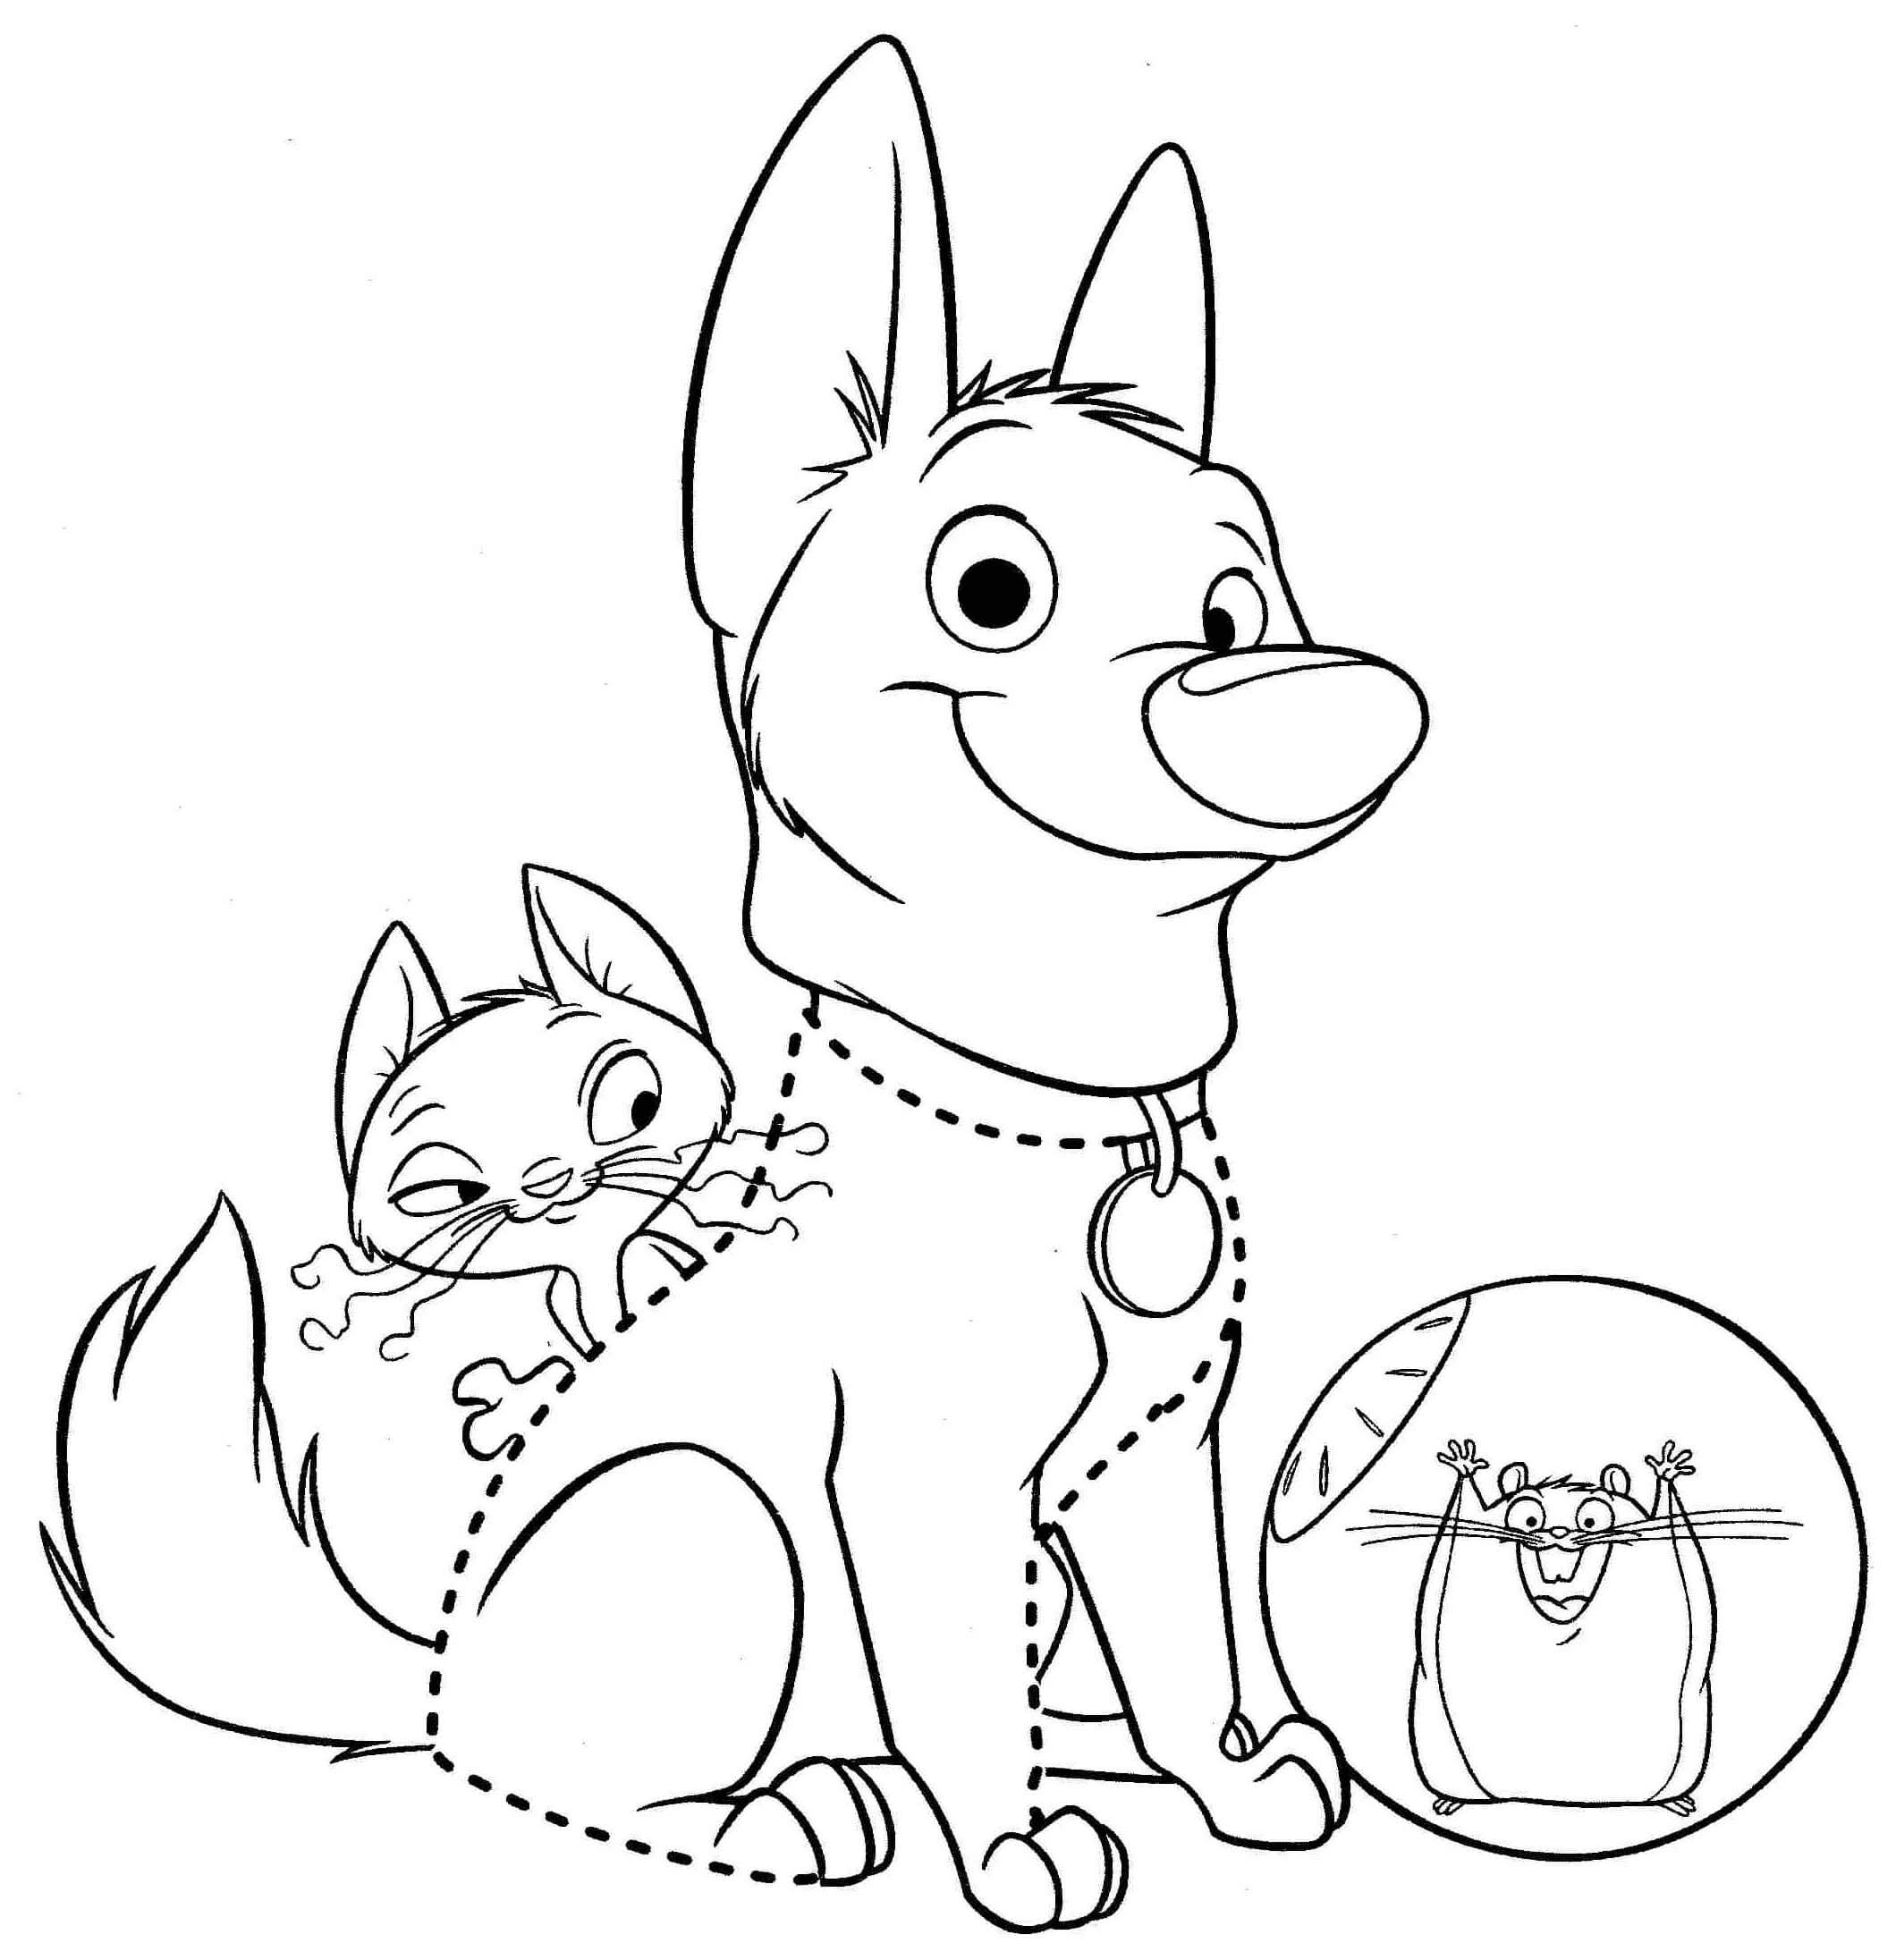 Bolt, Mittens, Rhino Coloring Pages